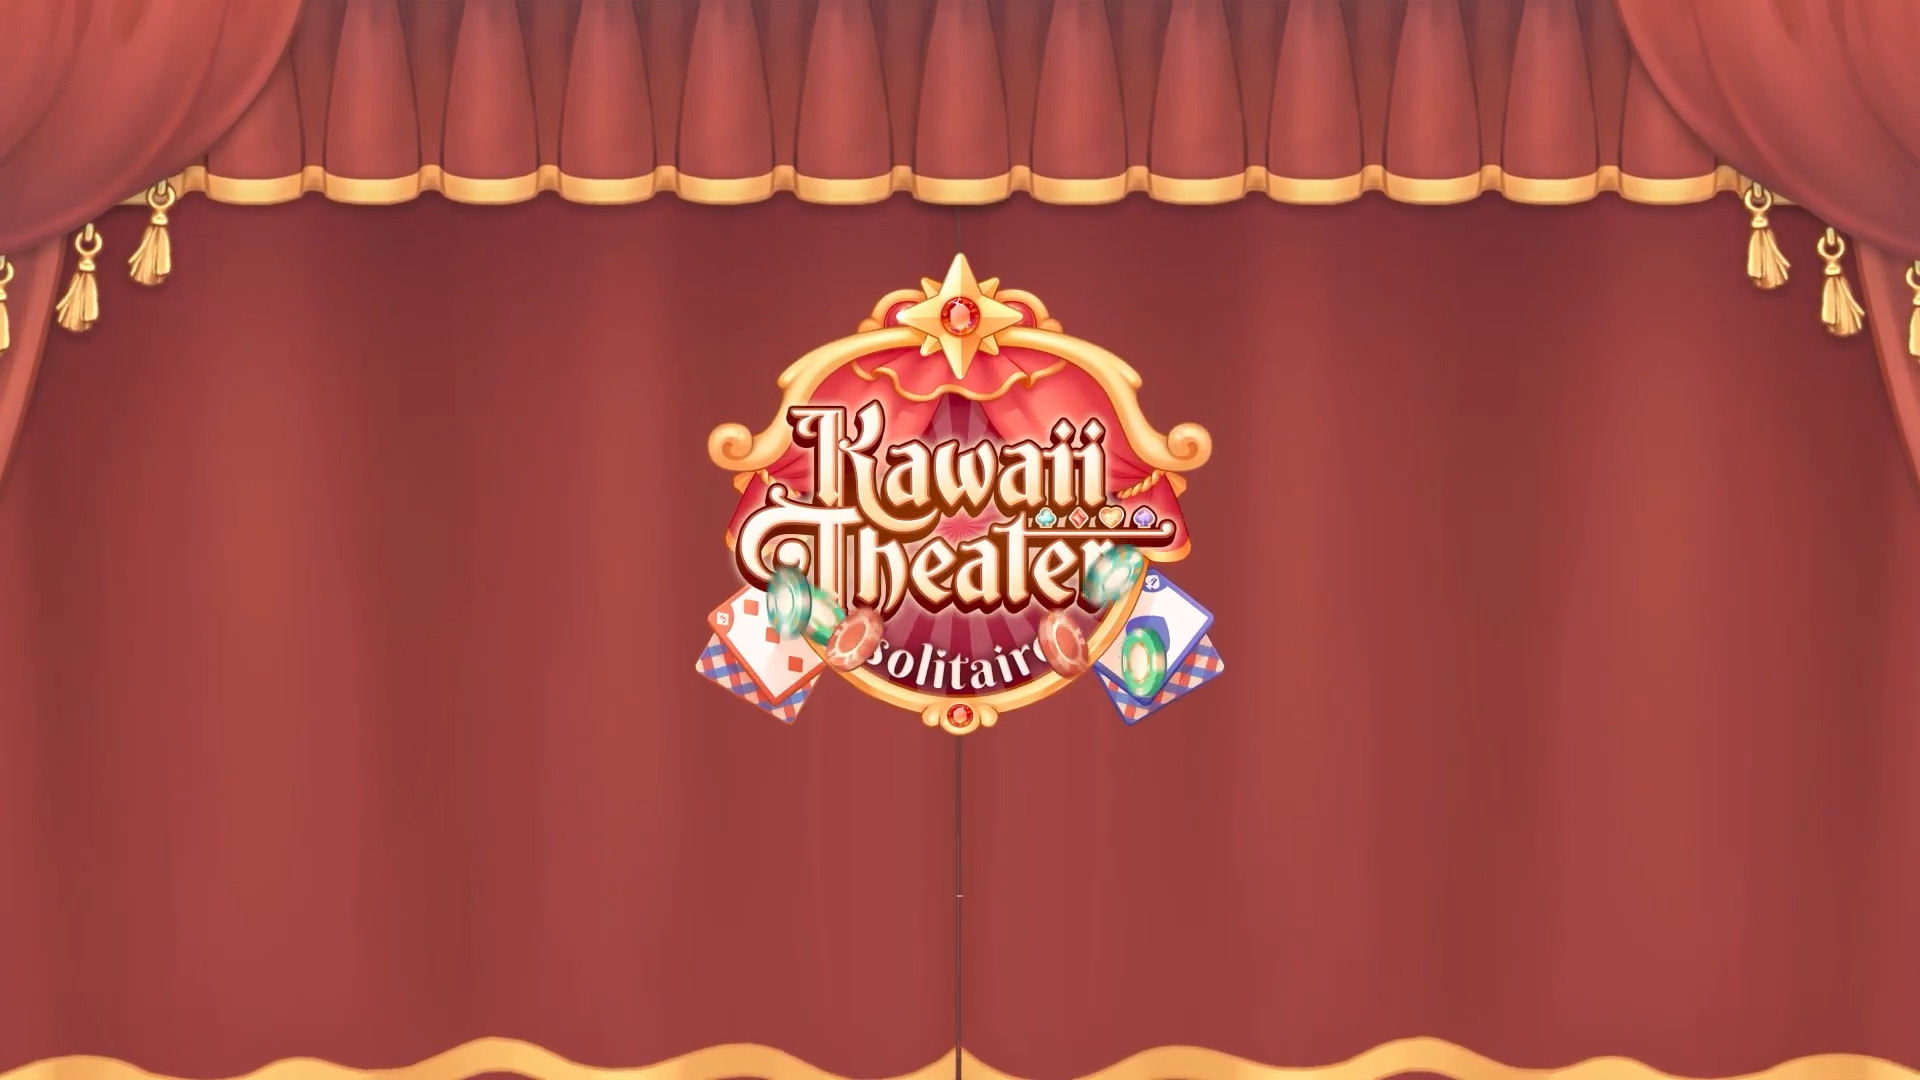 Full version of Android Board game apk Kawaii Theater Solitaire for tablet and phone.